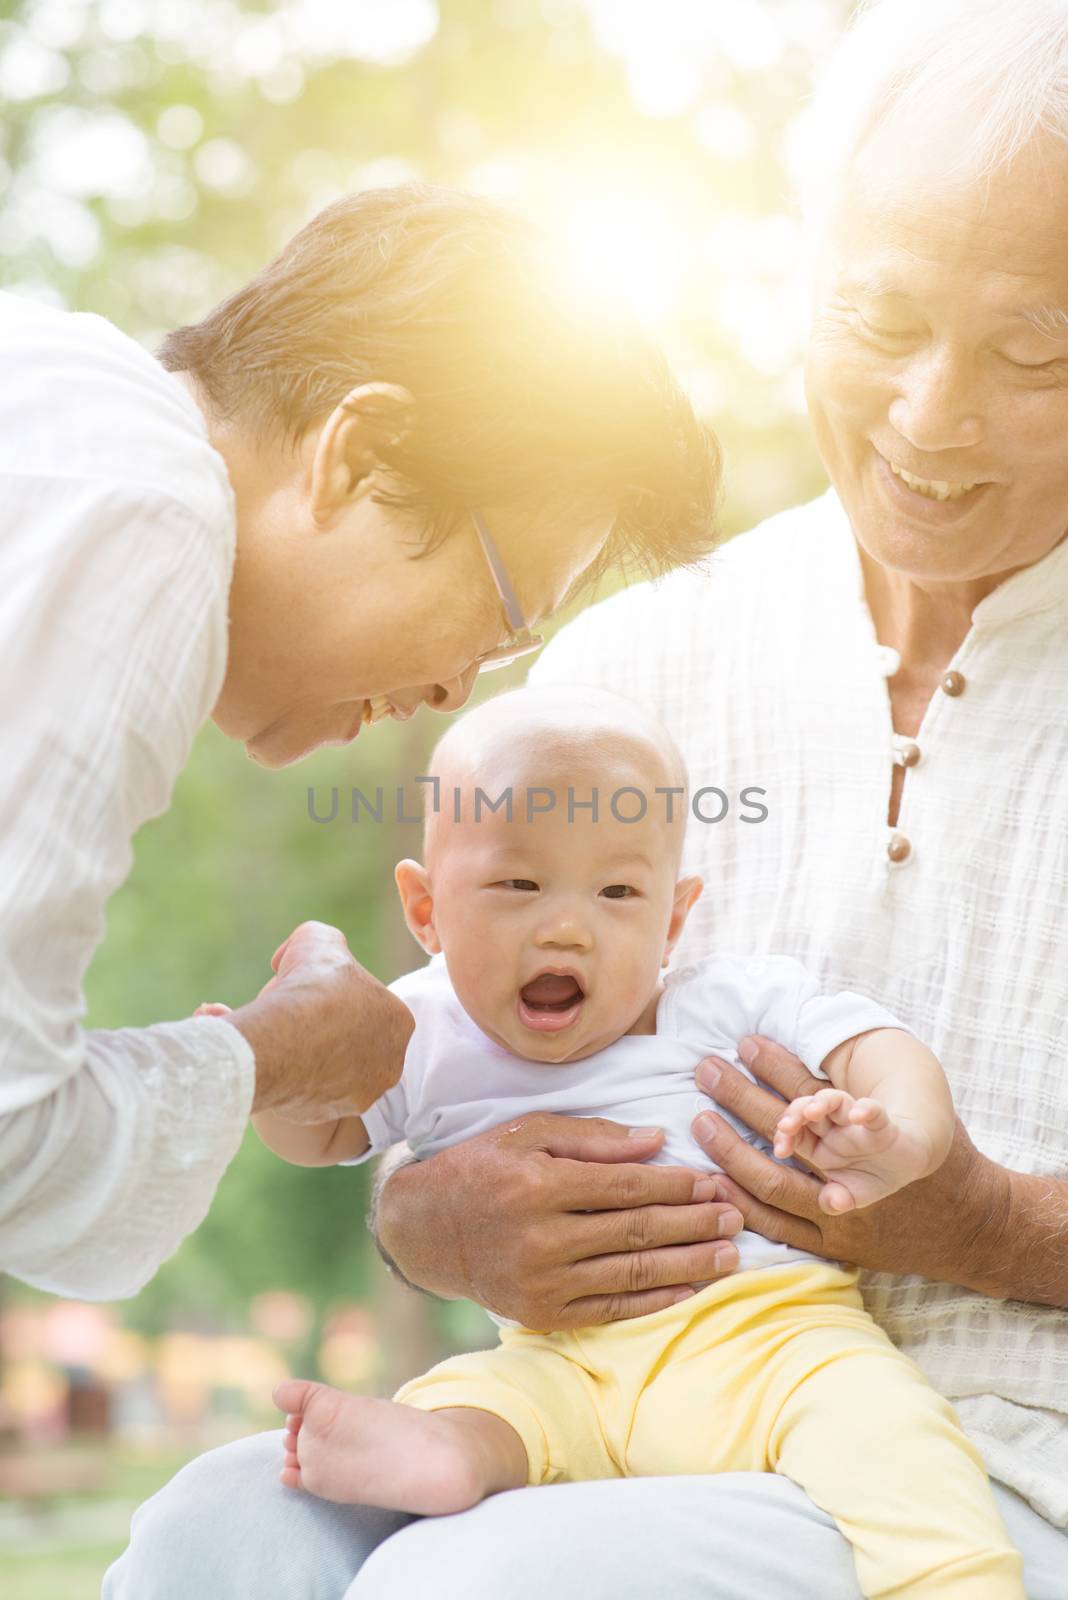 Happy grandparents with grandchild at outdoors park. Asian family, life insurance concept.